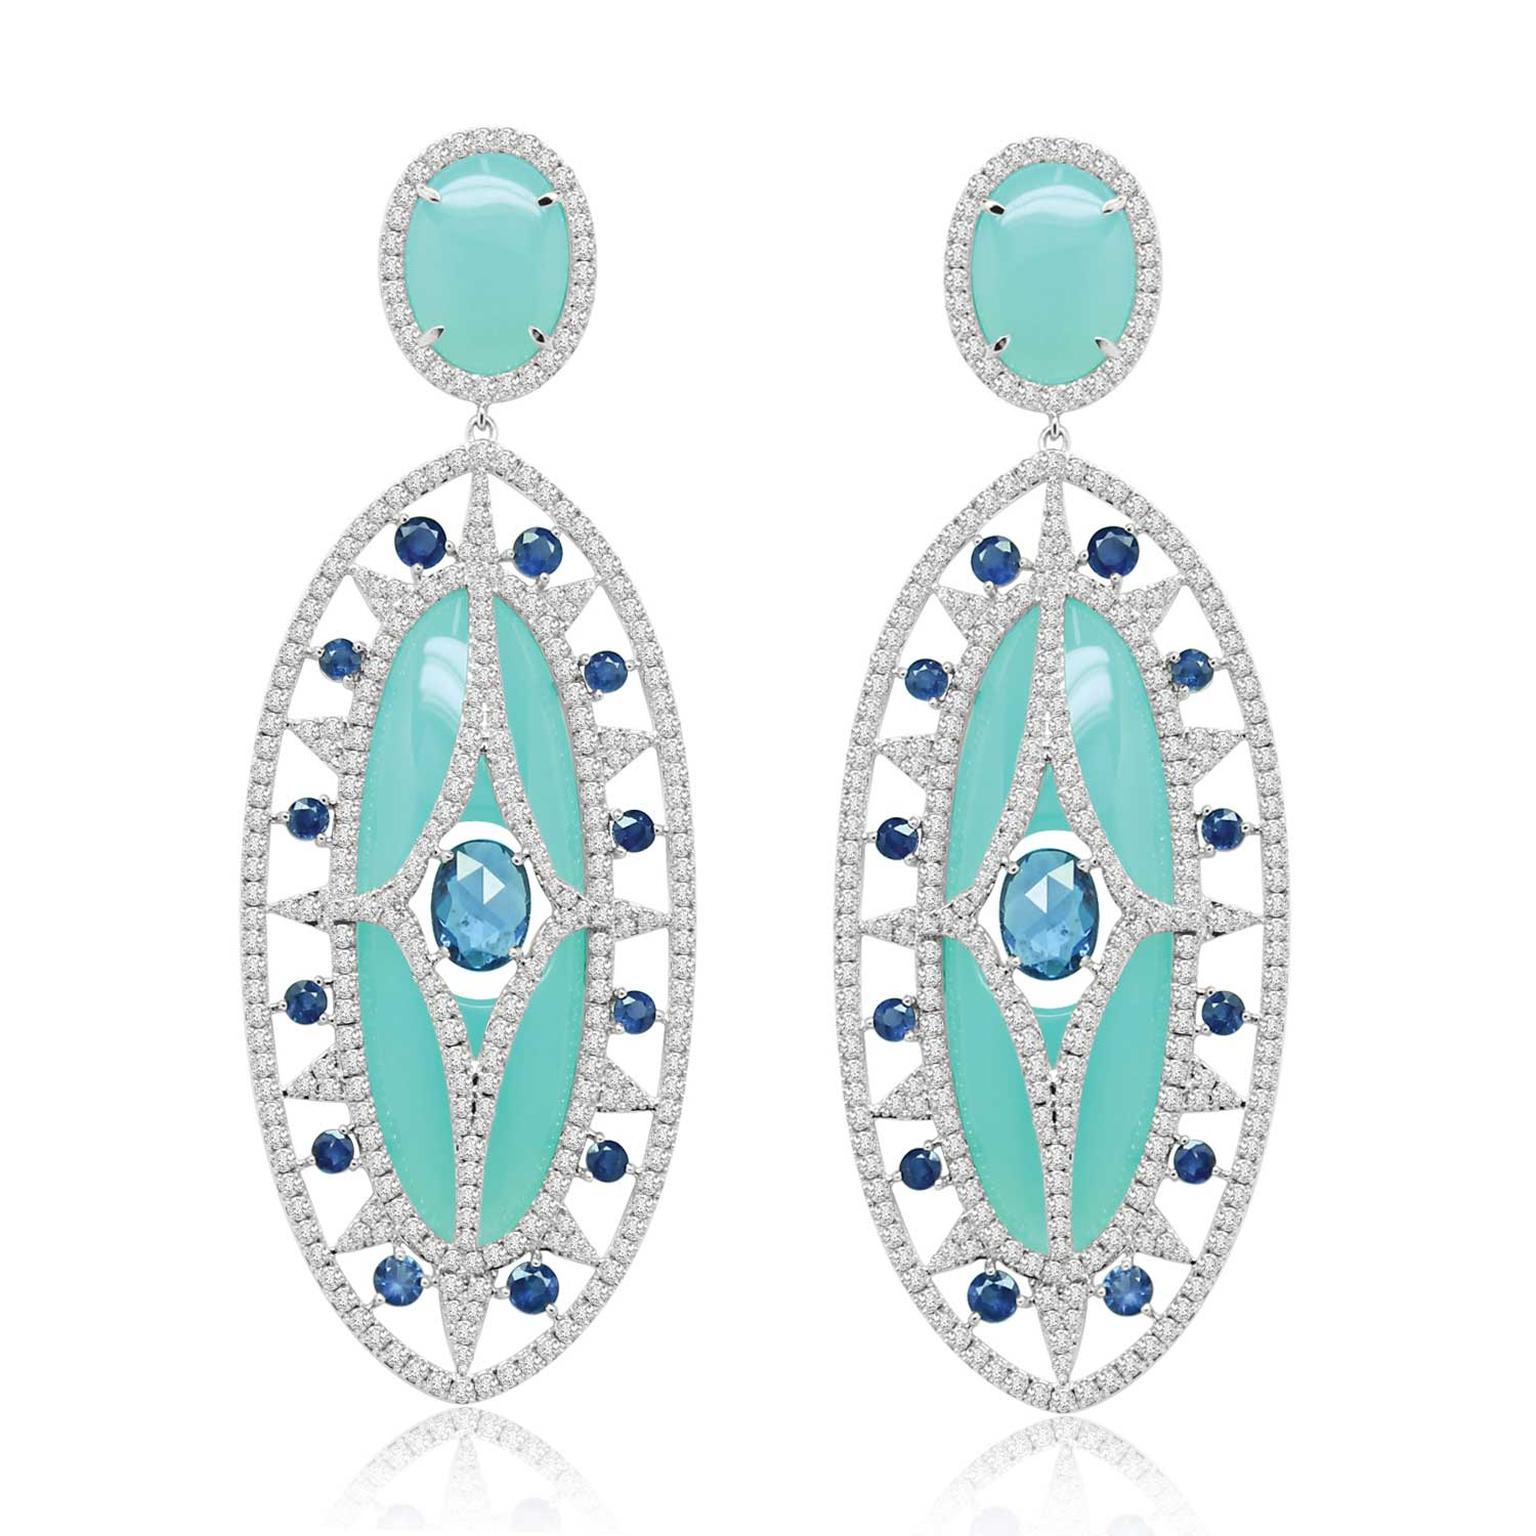 Sutra turquoise, sapphire and diamond earrings